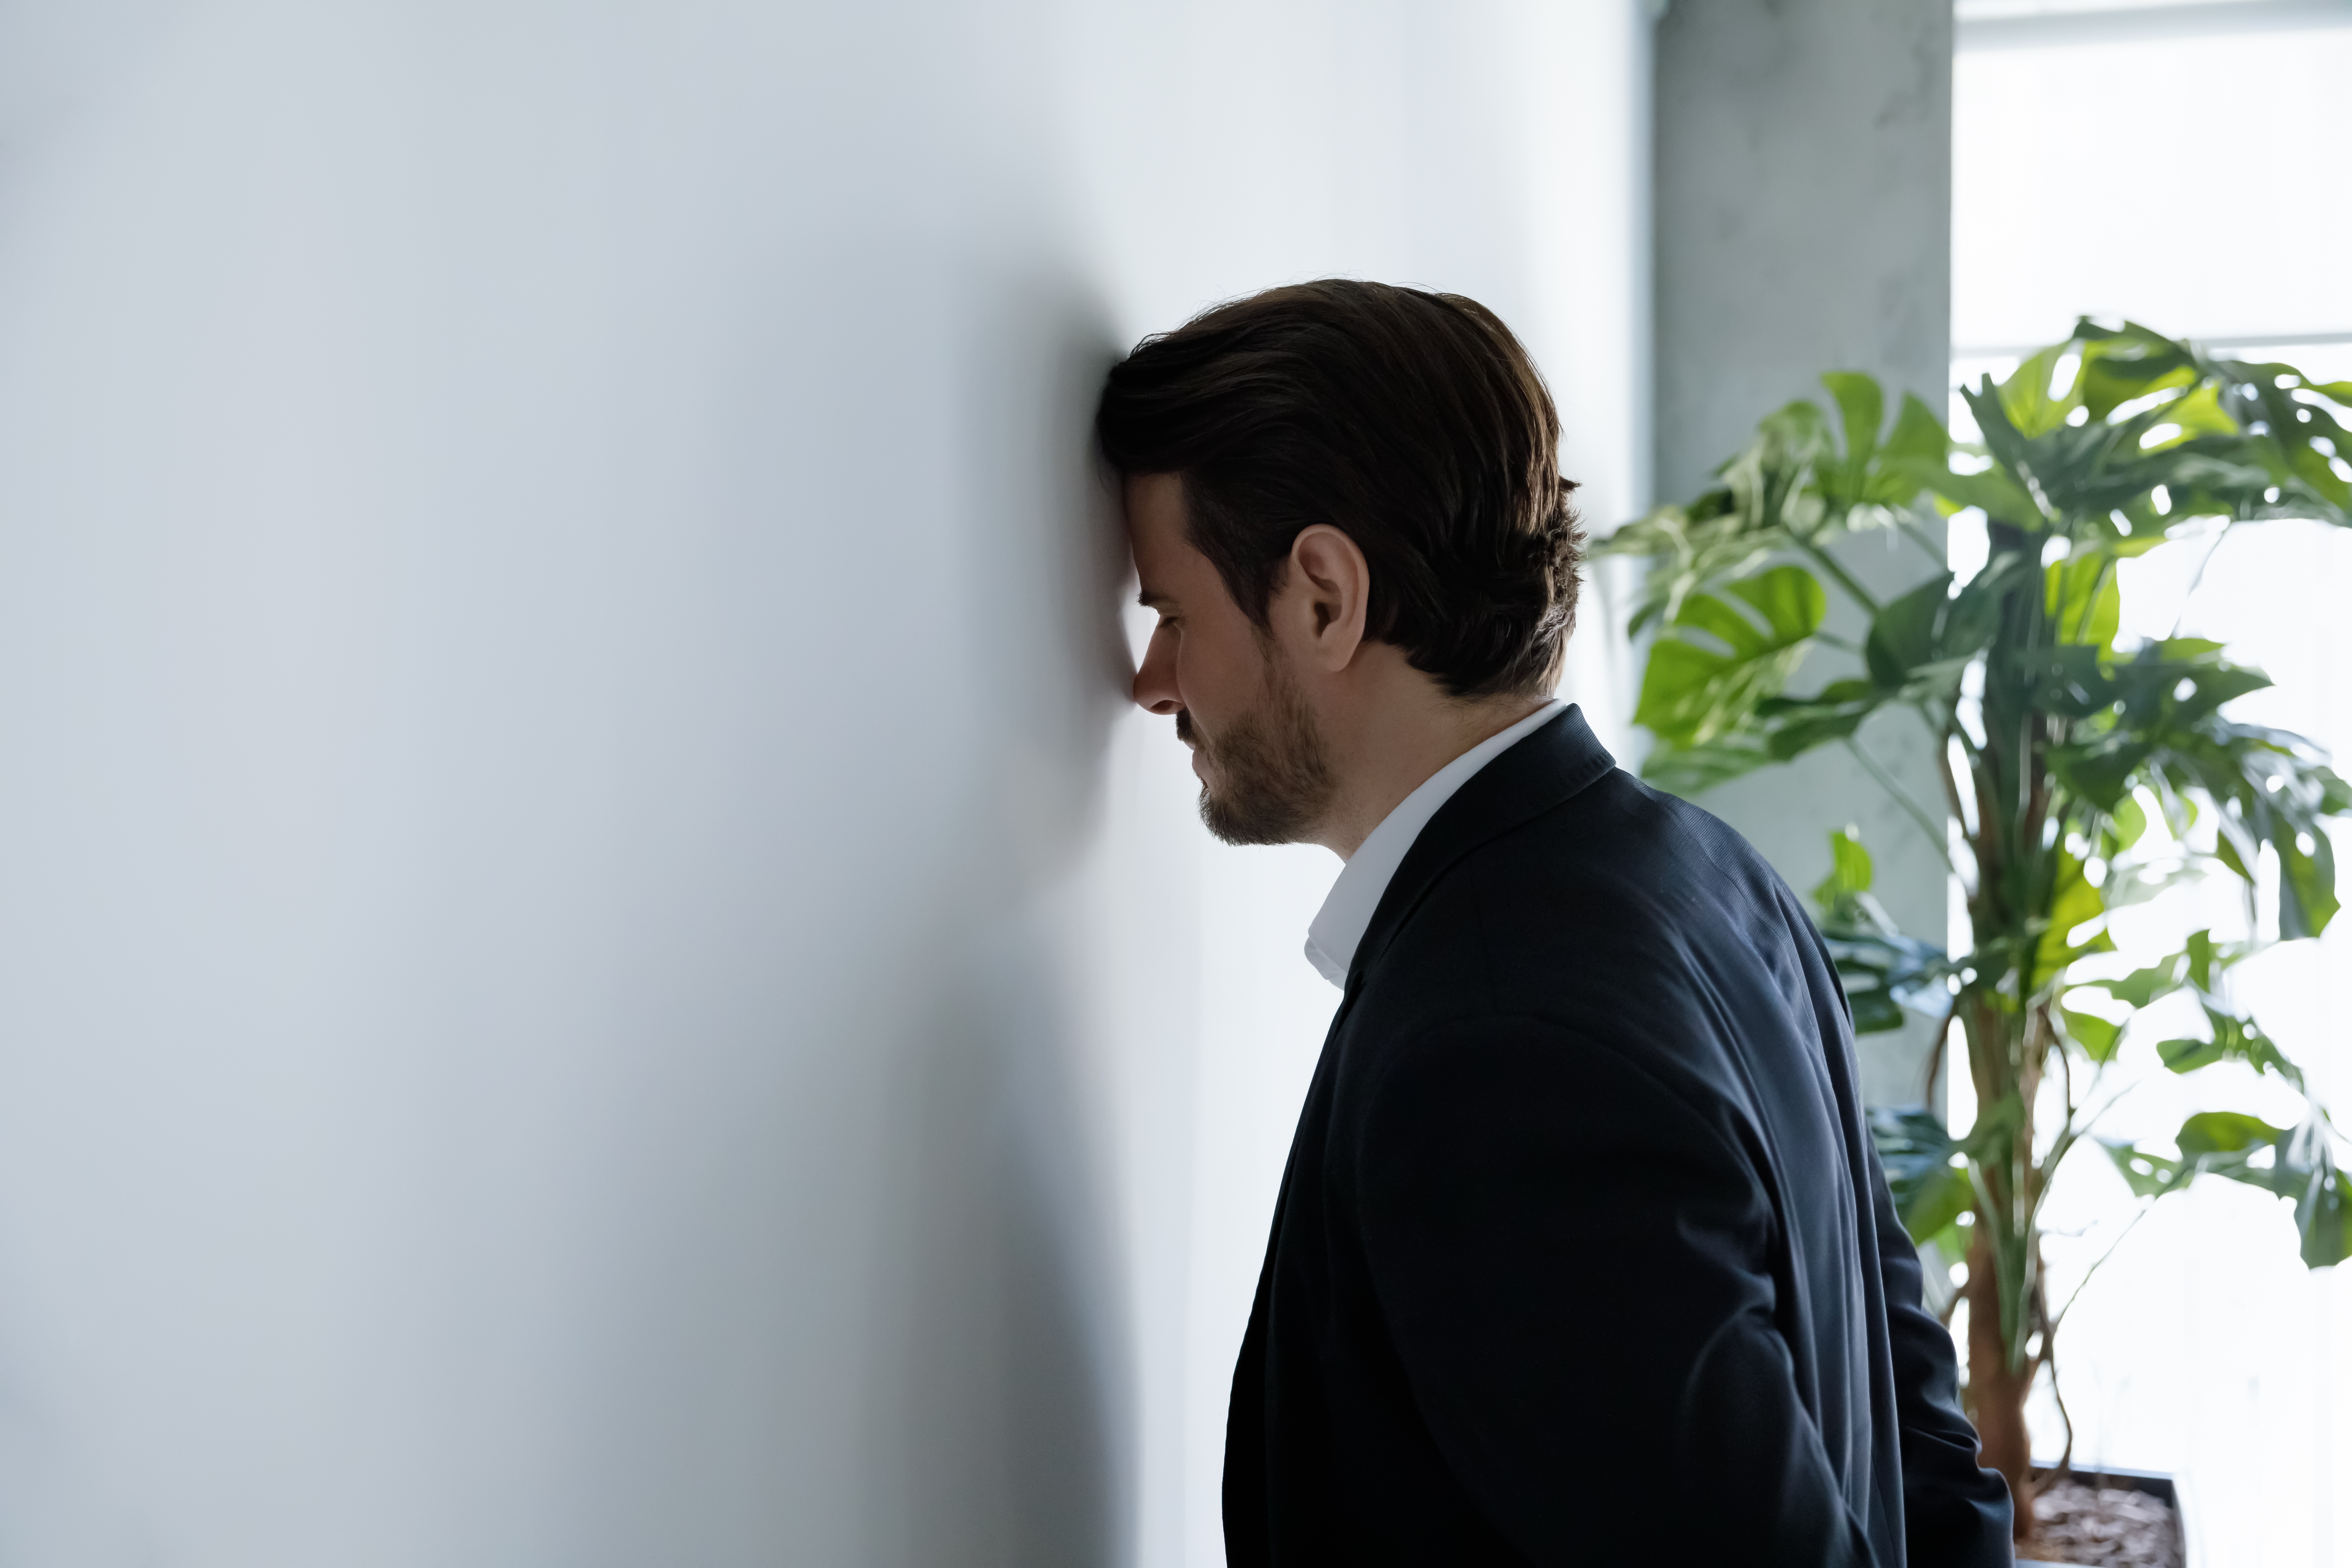 An upset businessman banging his head against a wall | Source: Shutterstock